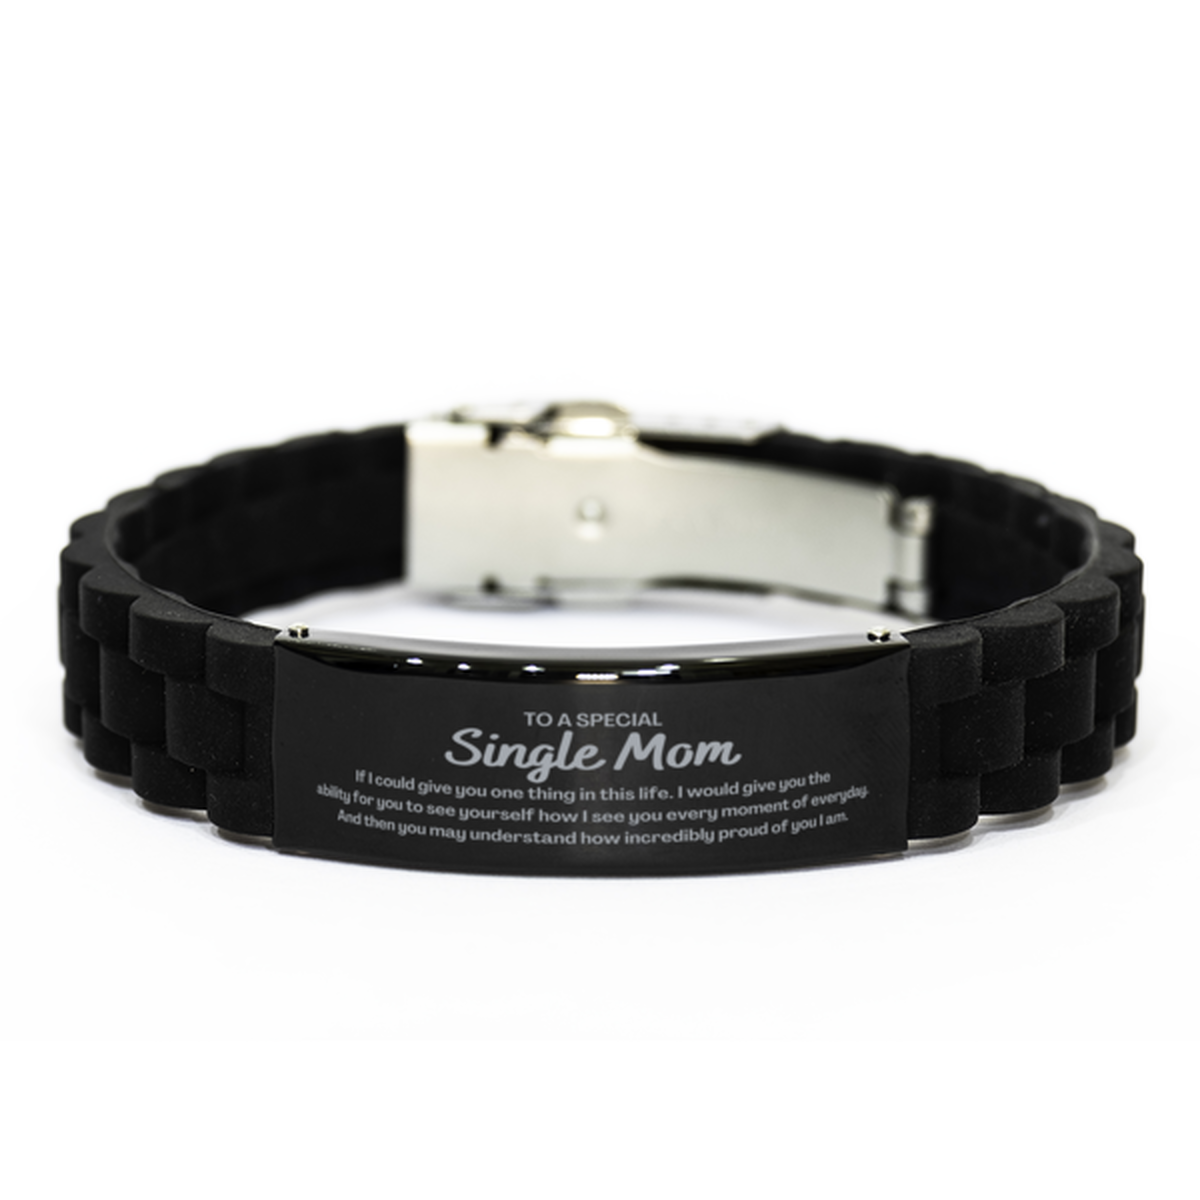 To My Single Mom Black Glidelock Clasp Bracelet, Gifts For Single Mom Engraved, Inspirational Gifts for Christmas Birthday, Epic Gifts for Single Mom To A Special Single Mom how incredibly proud of you I am